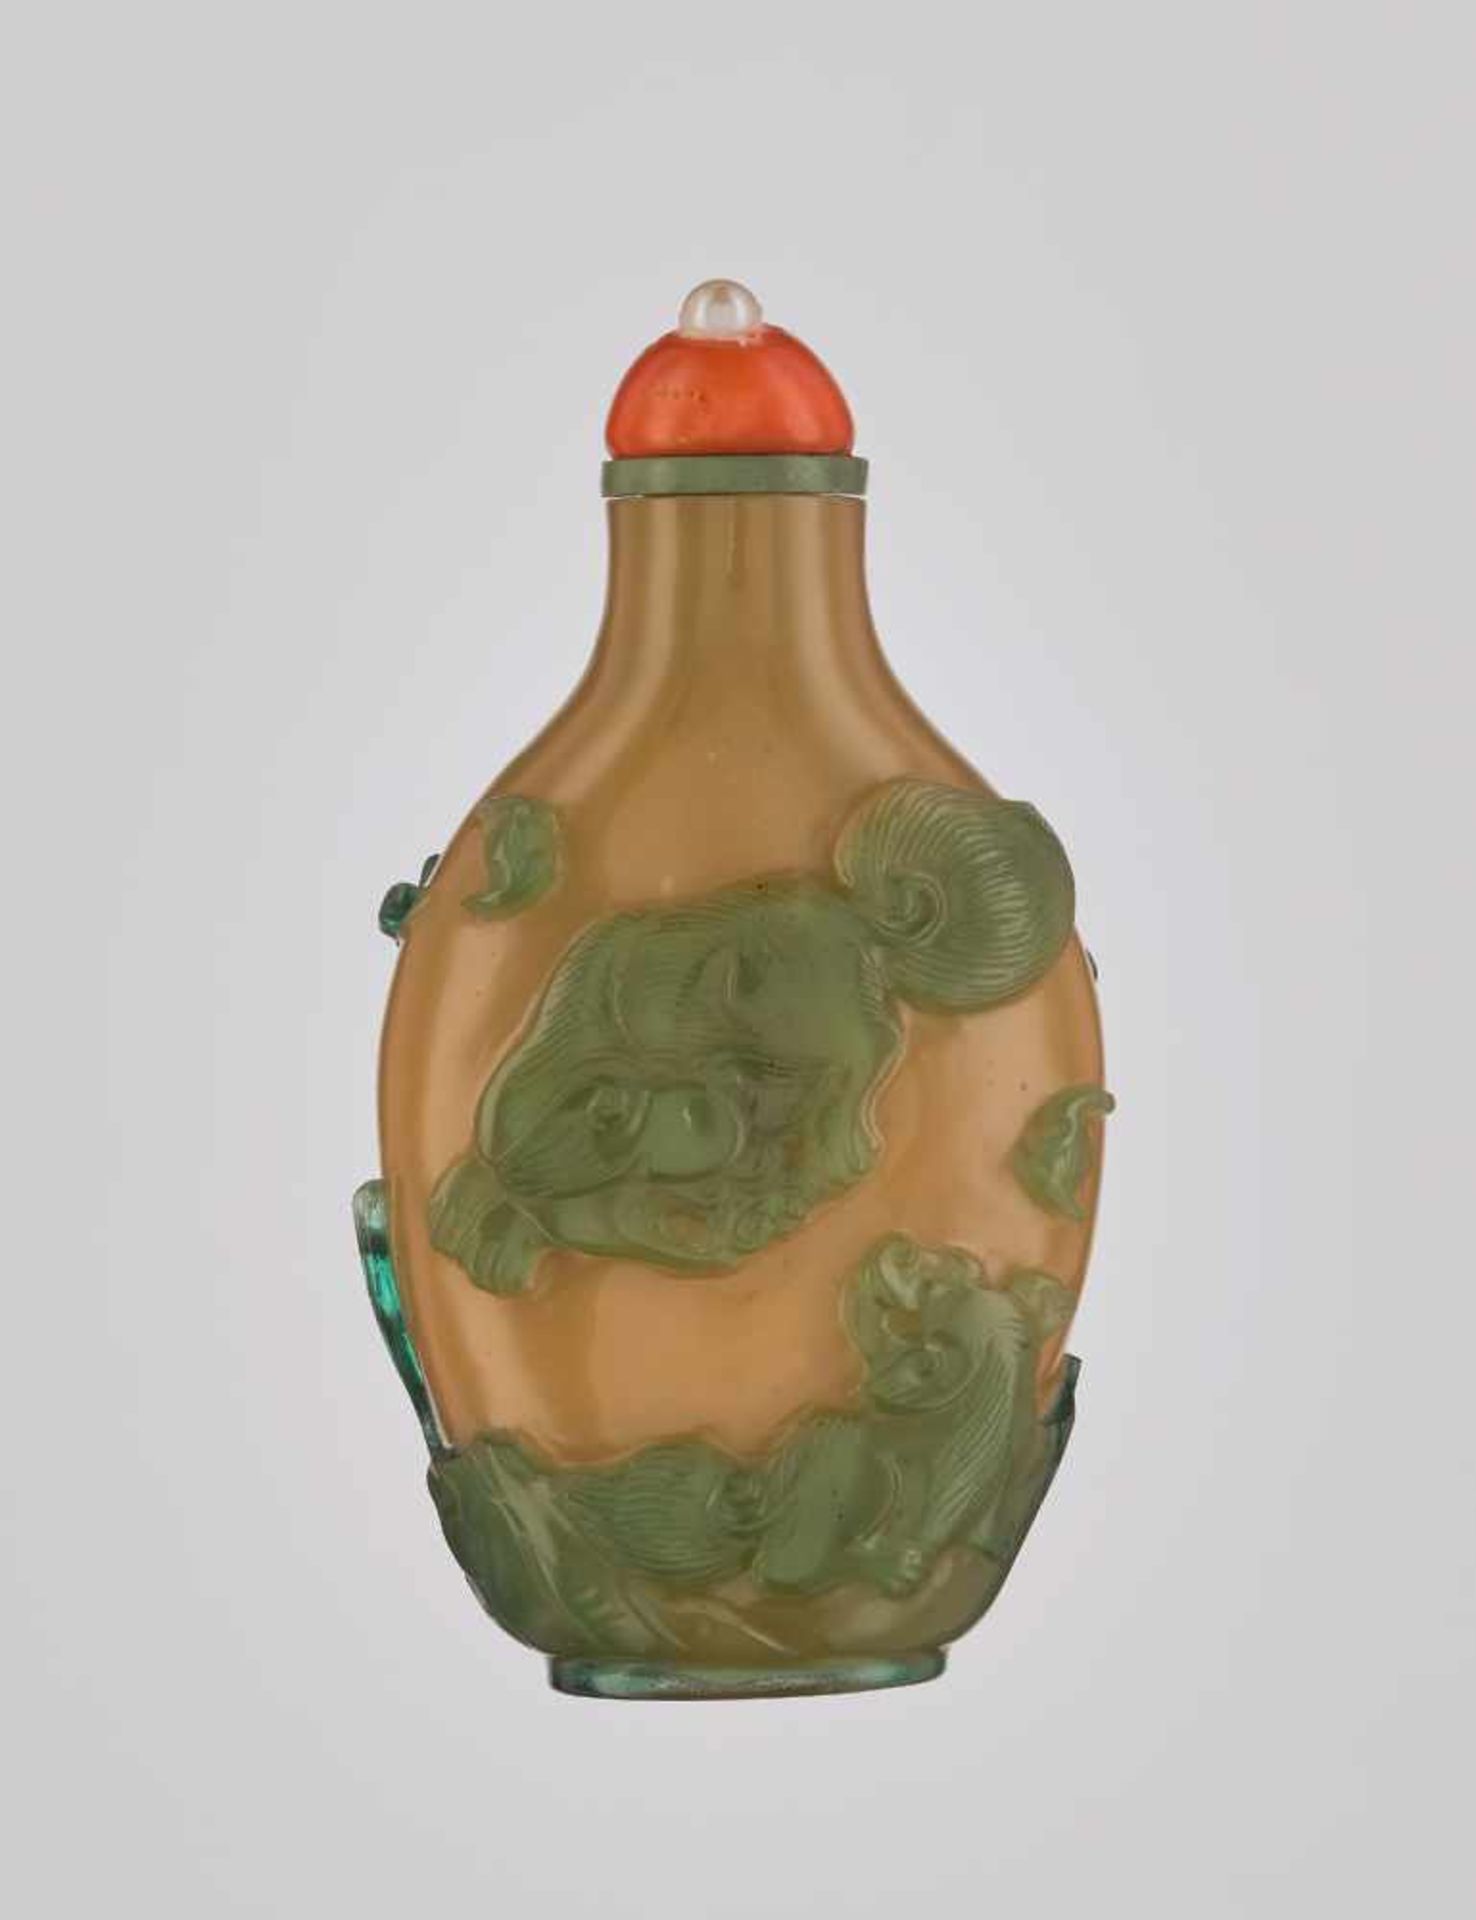 A CARAMEL-BROWN AND GREEN ‘BUDDHIST LION & CARPS’ OVERLAY GLASS SNUFF BOTTLE Carved opaque caramel-